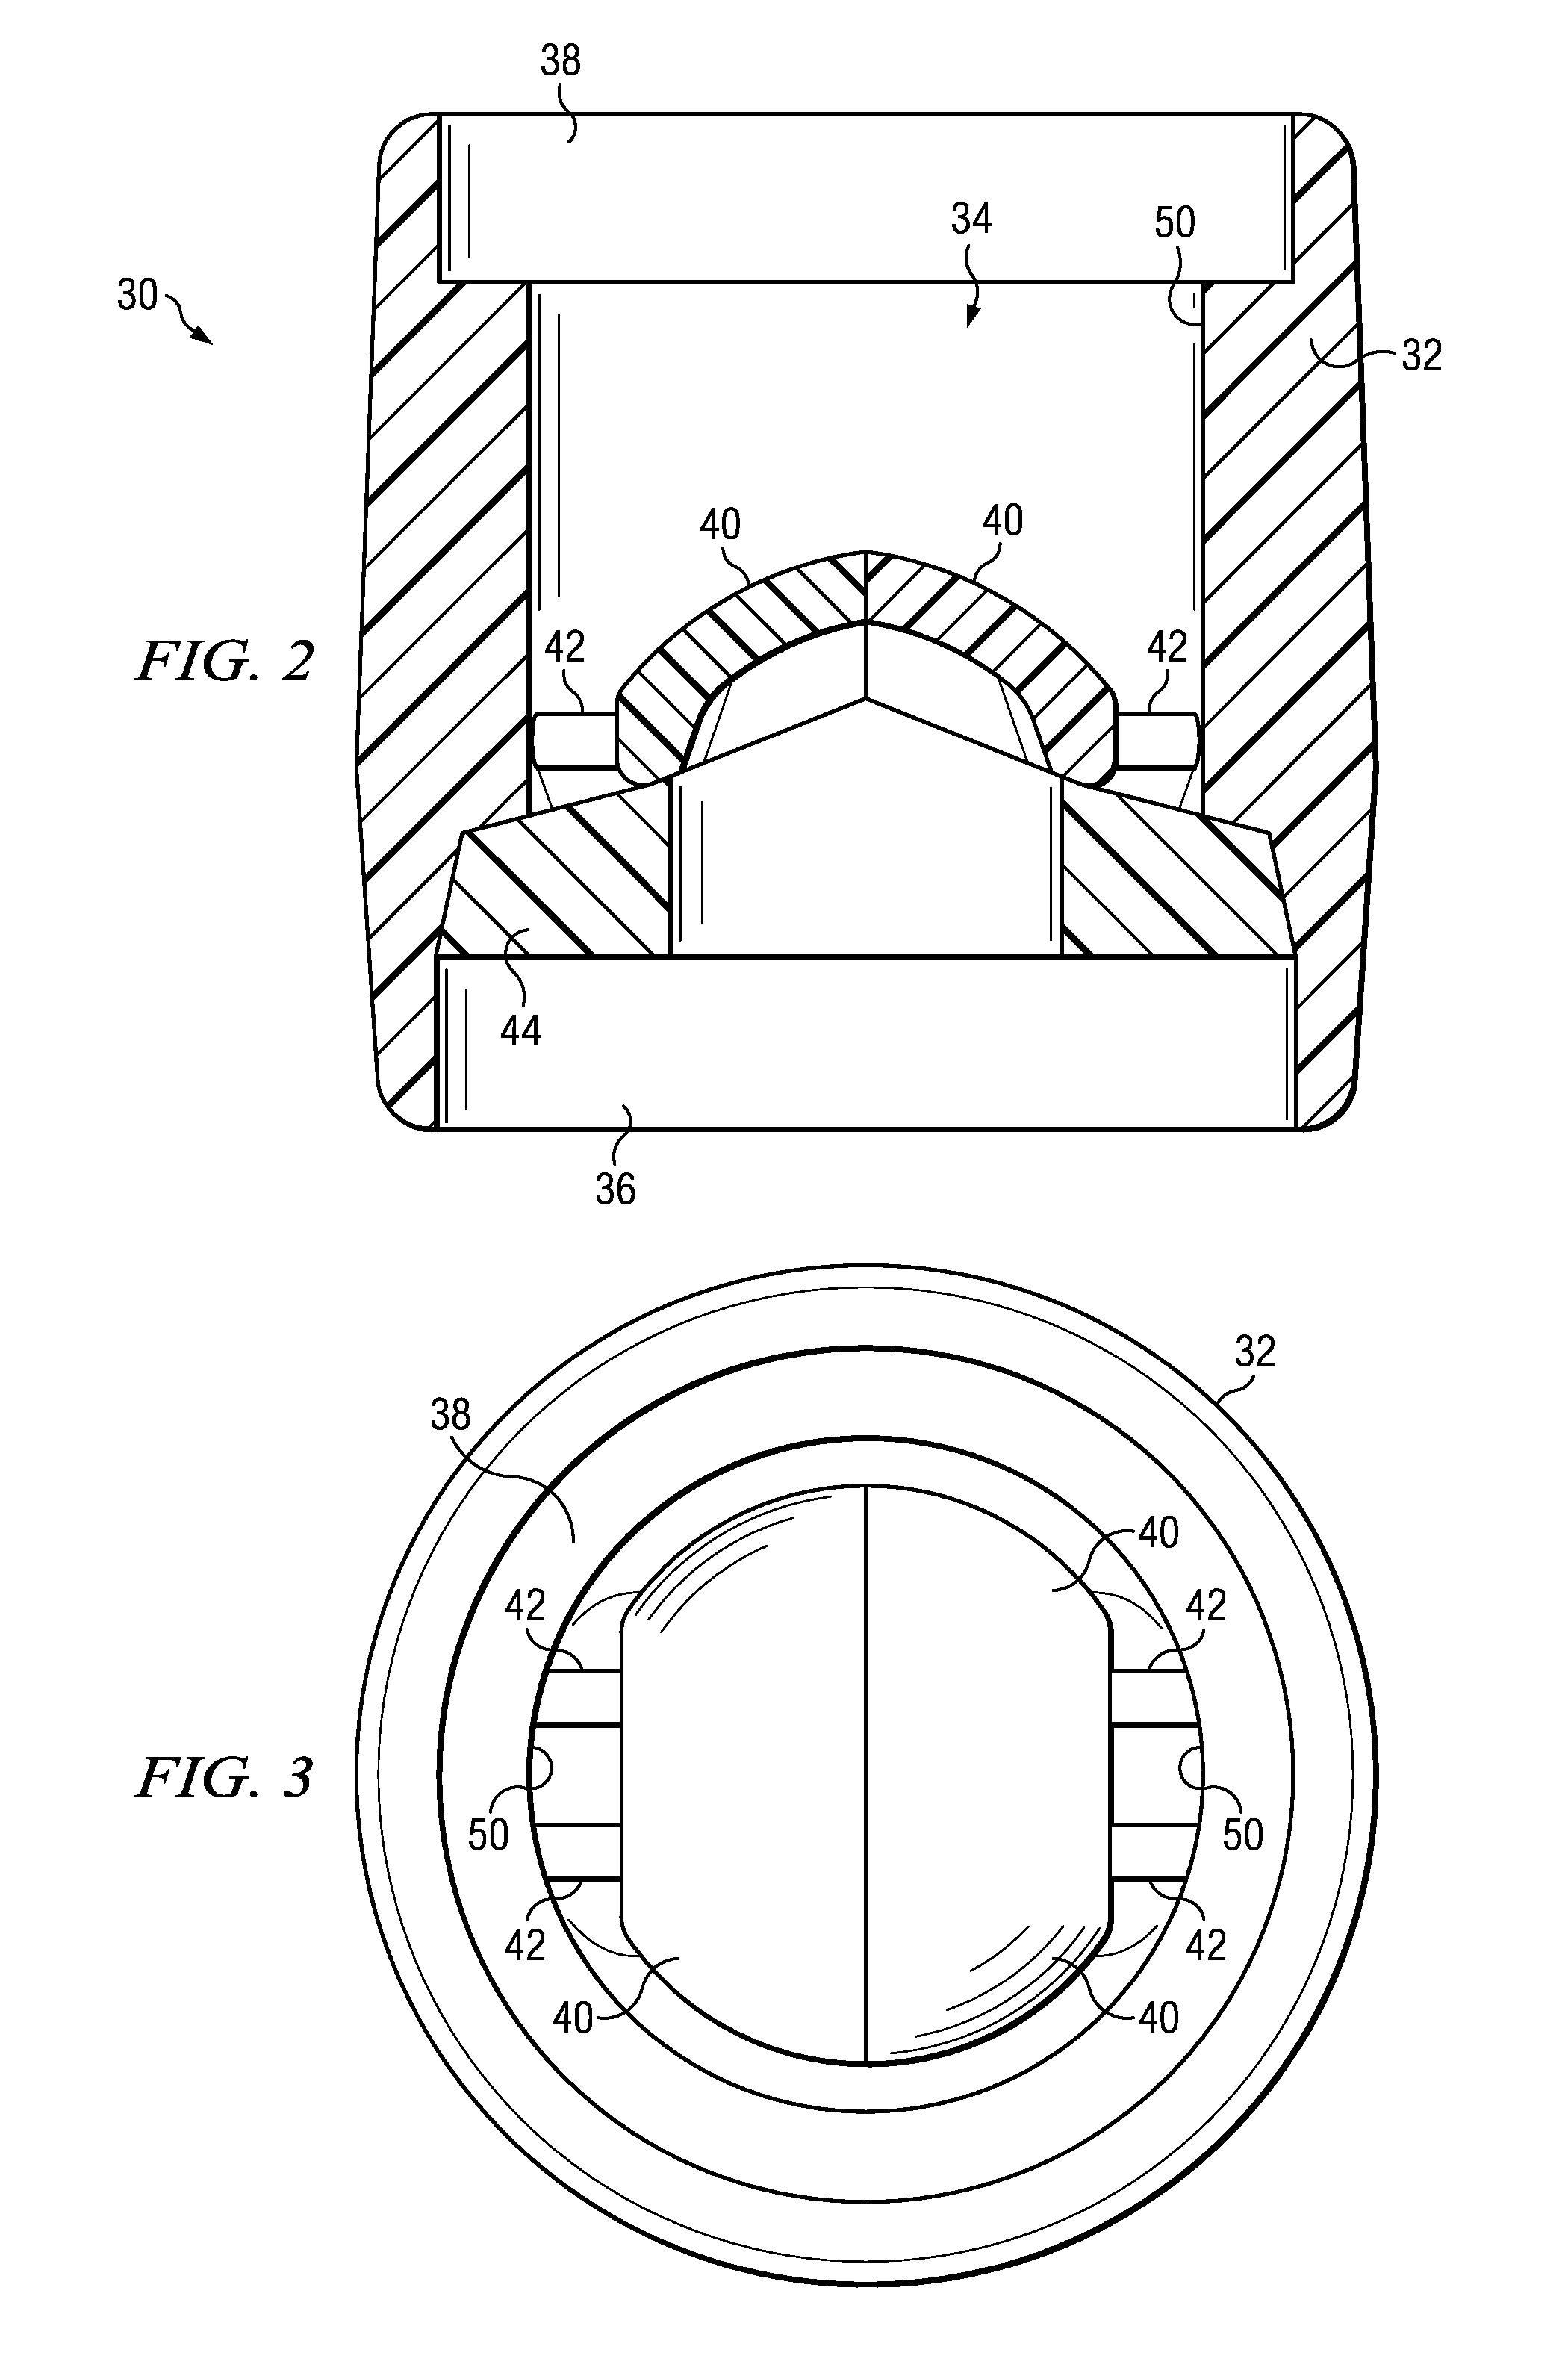 Valve for ventricular assist device